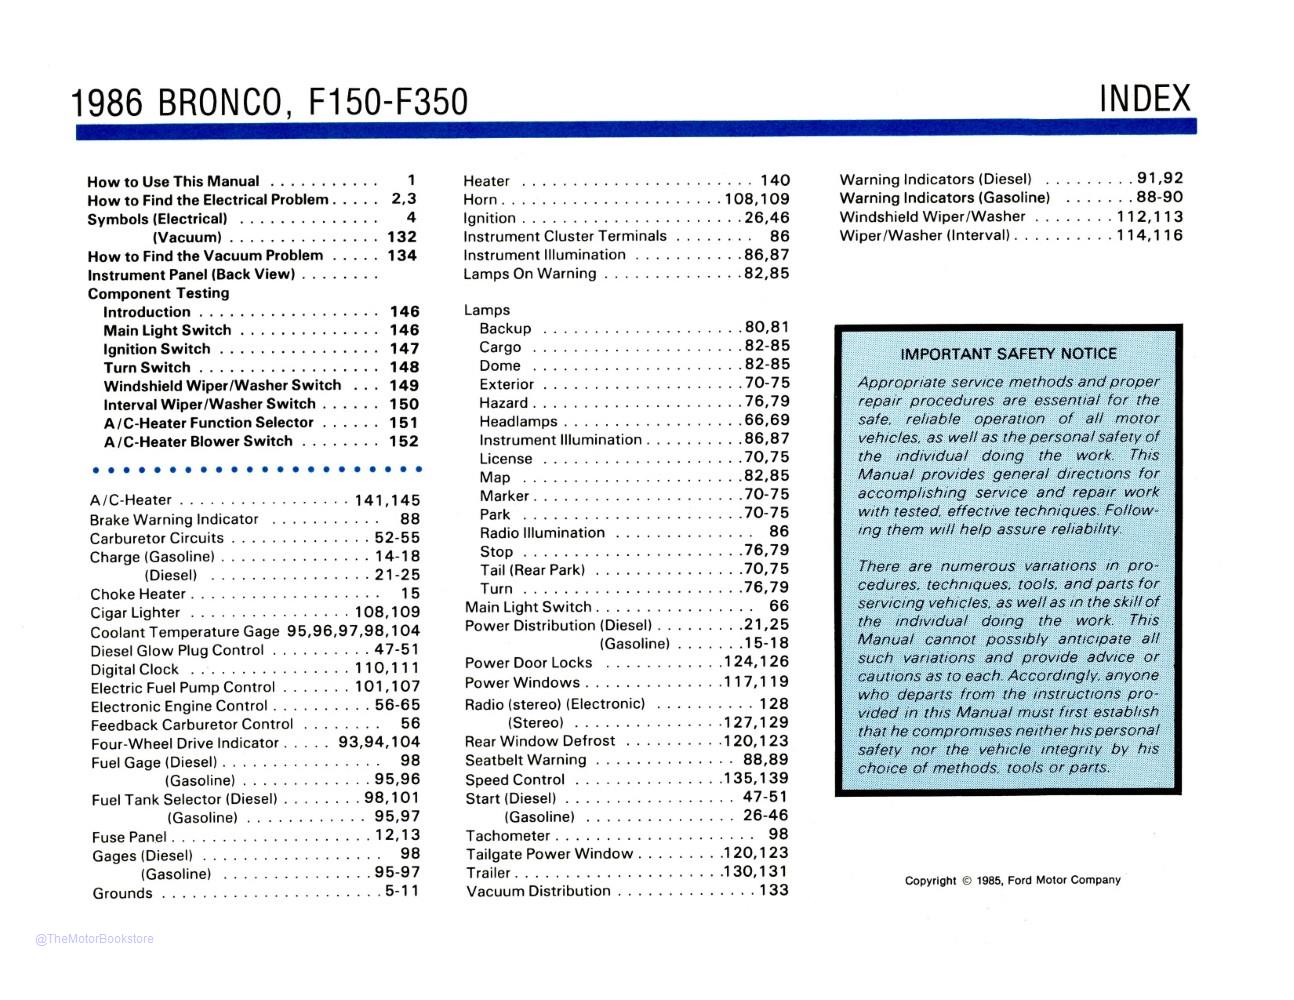 1986 Ford F-Series Truck Electrical Vacuum Troubleshooting Manual  - Table of Contents